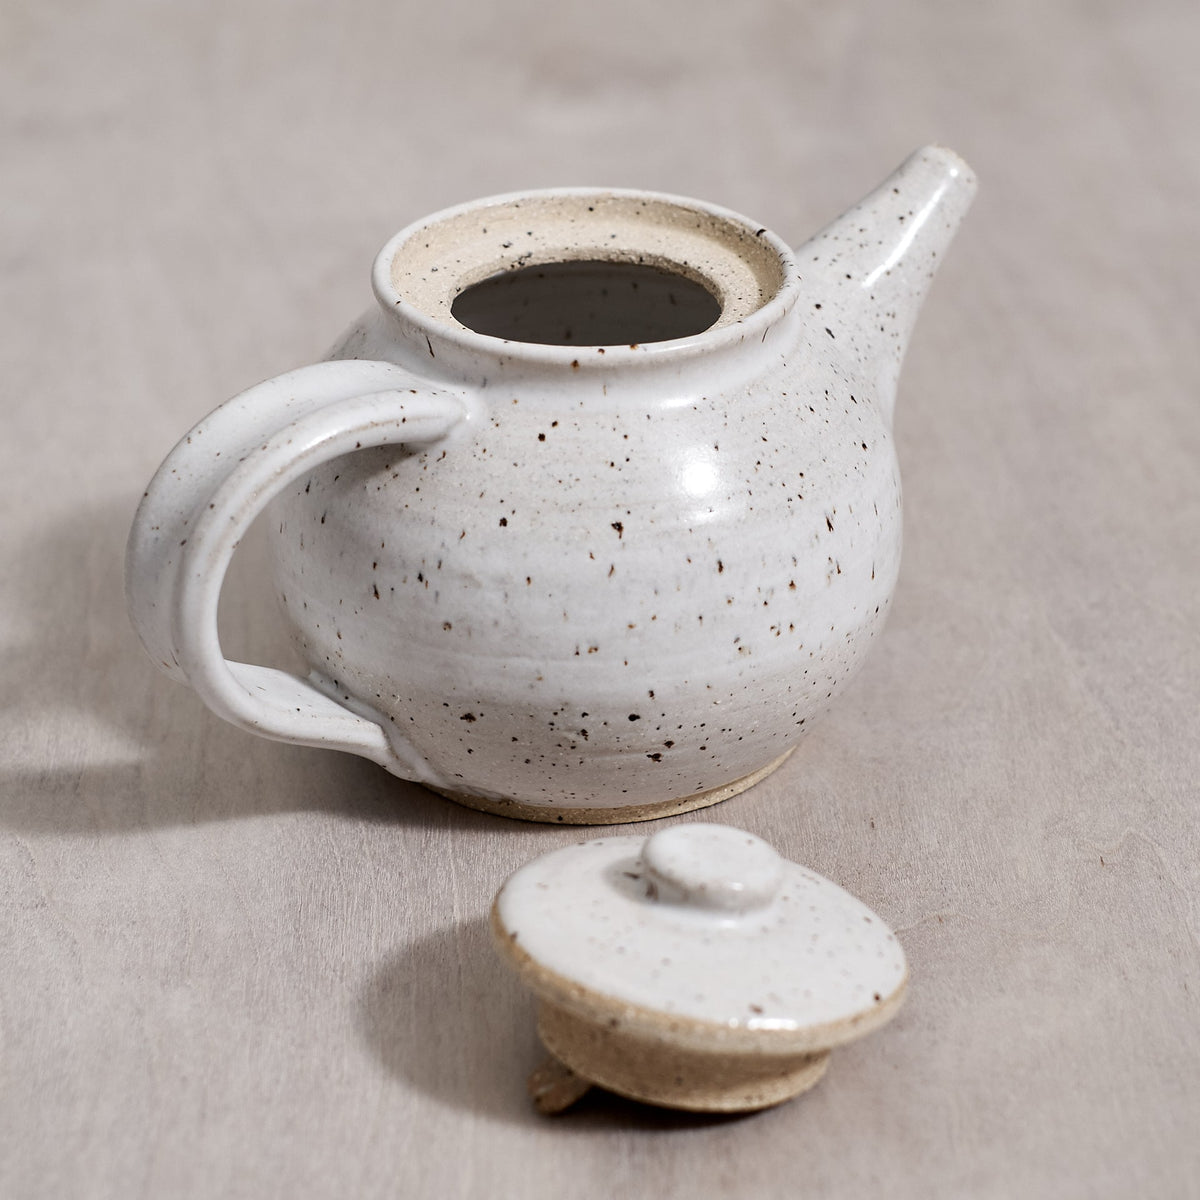 A handmade Nicola Shuttleworth Speckled teapot with a lid rests on a wooden table.